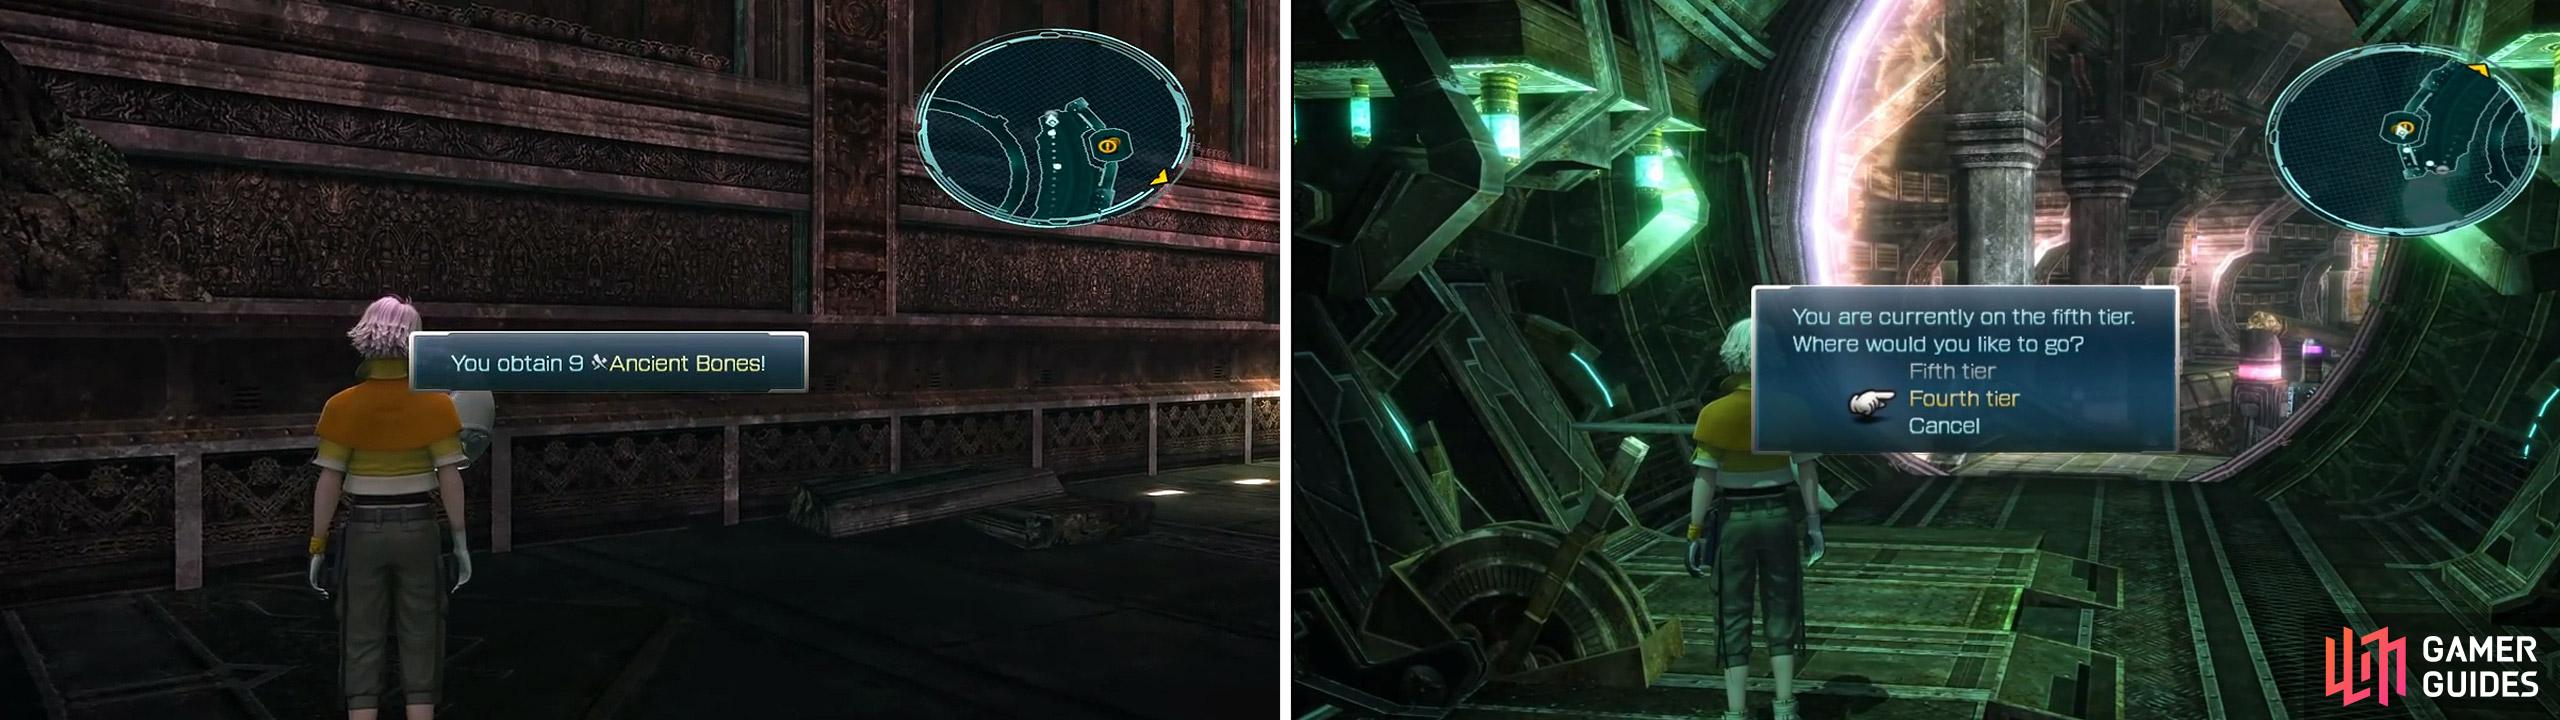 Ancient Bones x9 location (left) and the Elevator (right).